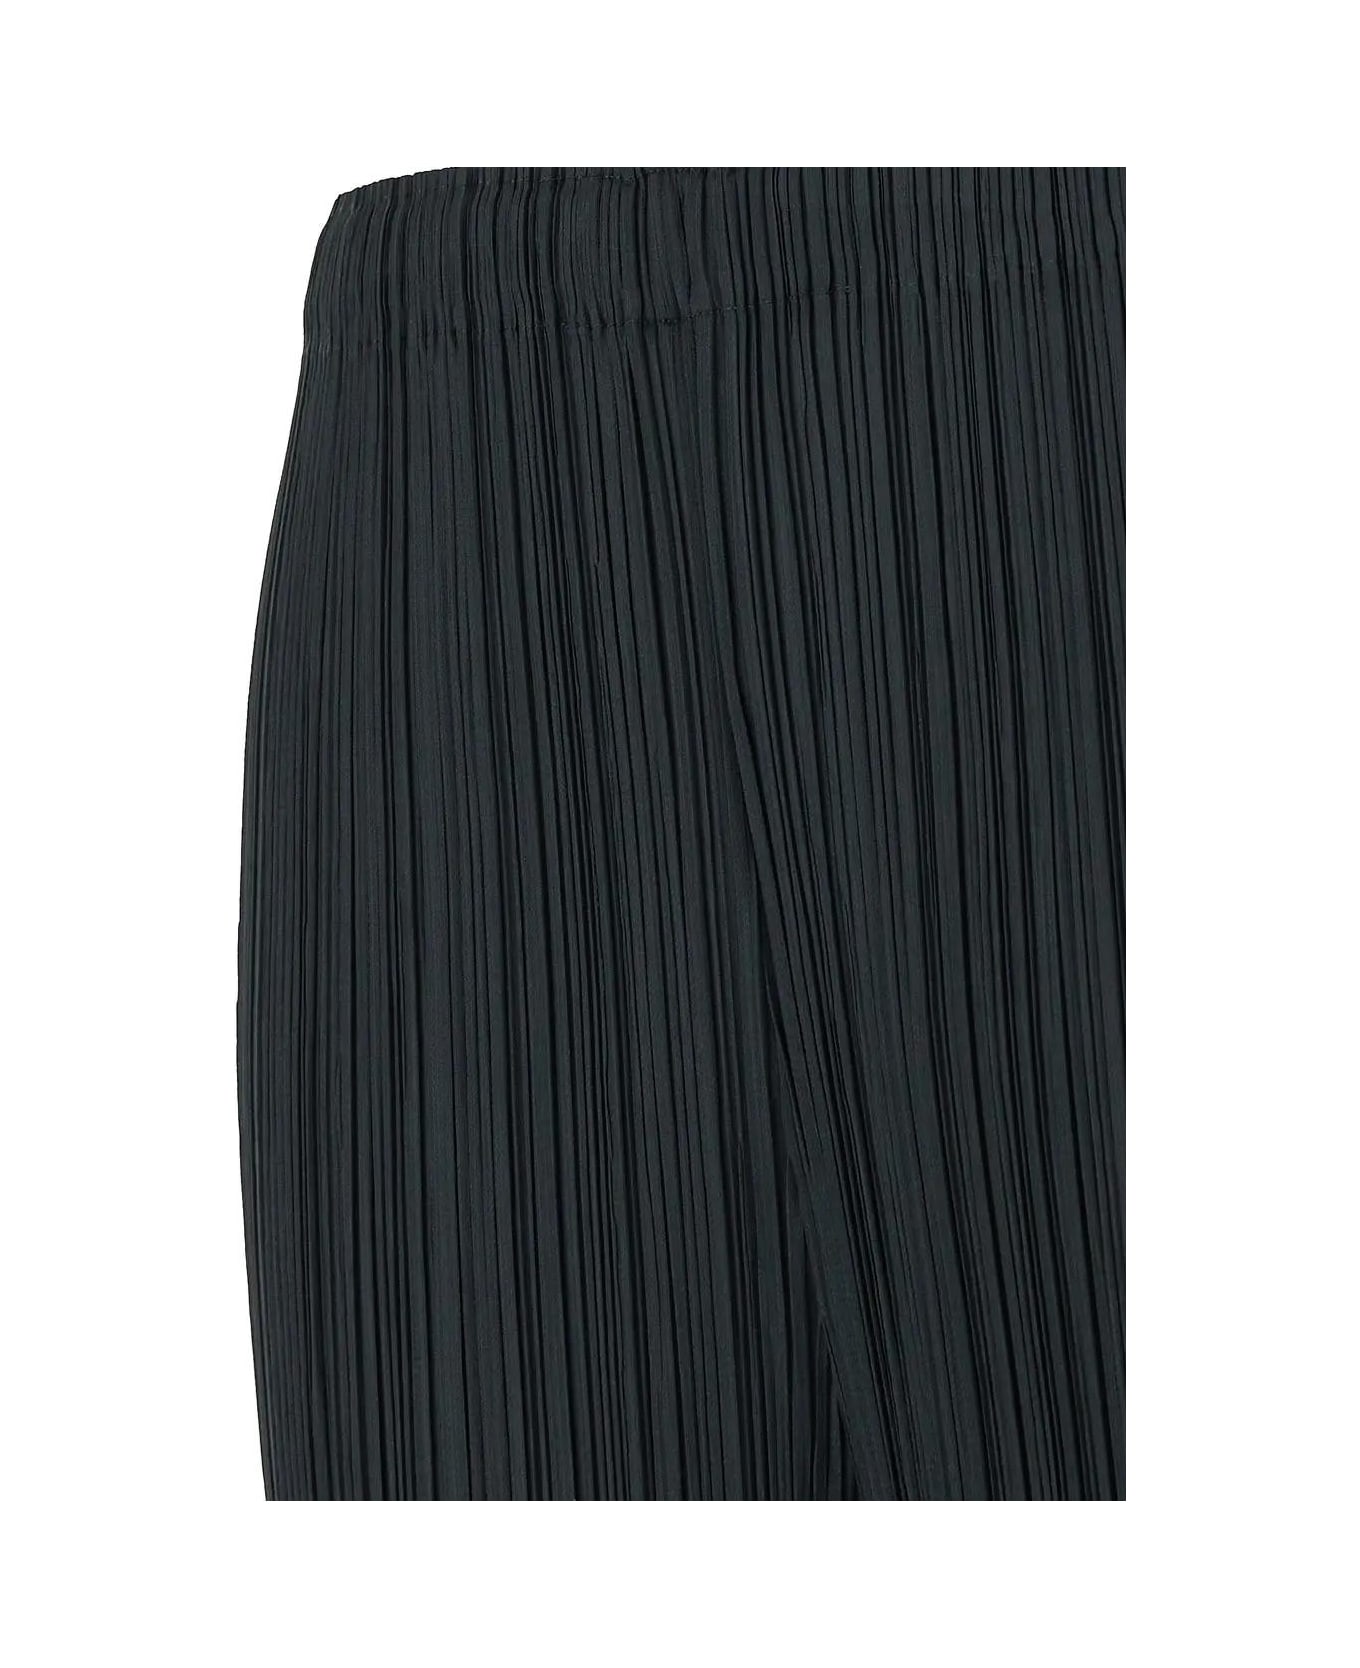 Pleats Please Issey Miyake Pleated Trouser - Charcoal